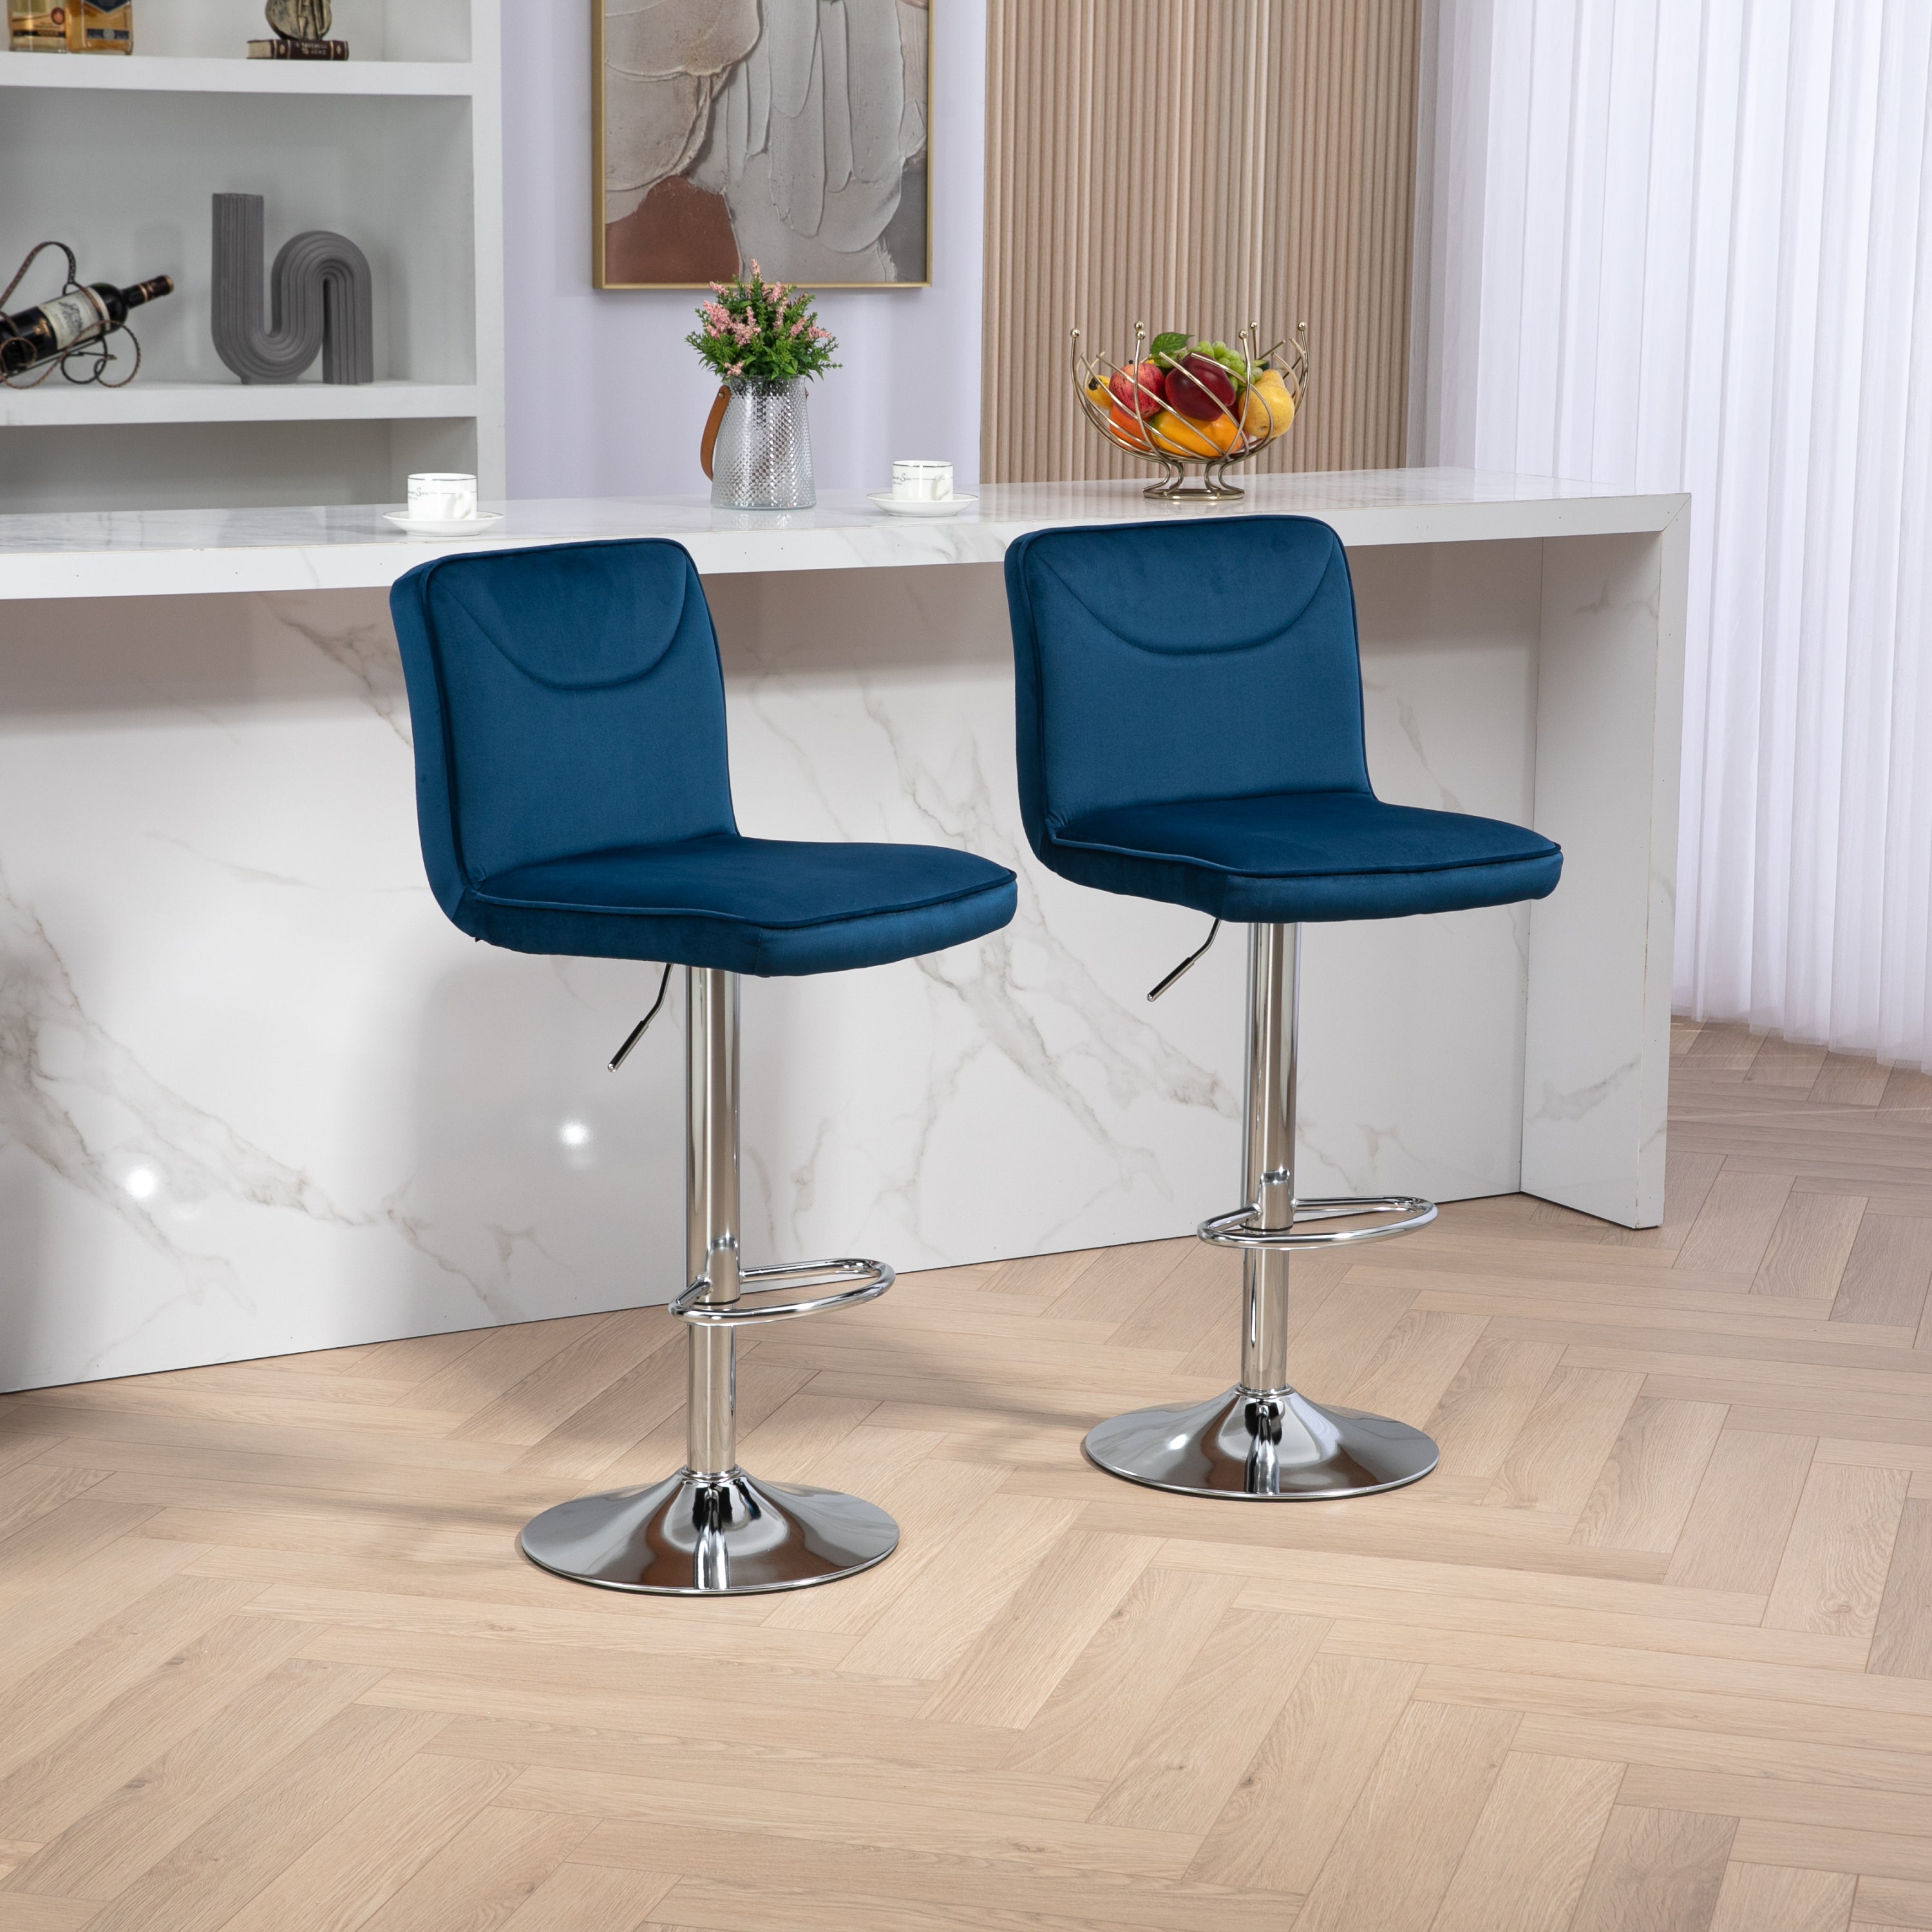 🆓🚛 Modern Swivel Bar stools Set of 2, Adjustable Counter Height Bar Chairs, with Backrest Footrest, Chrome Base, Navy Blue